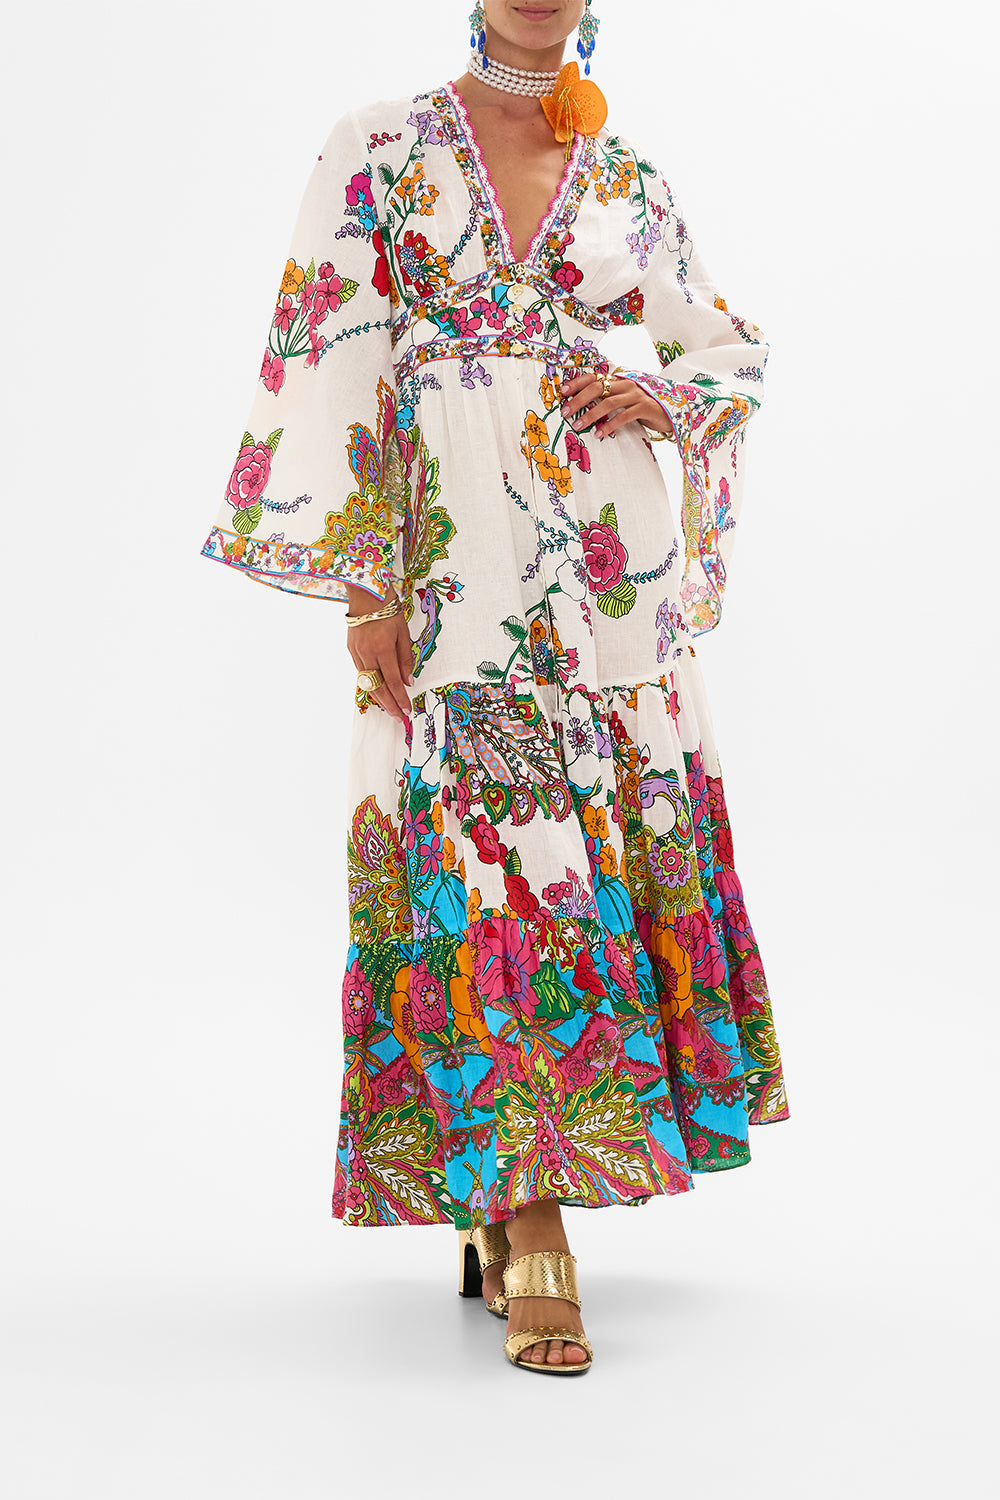 CAMILLA Floral Dress with Tiered Skirt in Cosmic Prairie